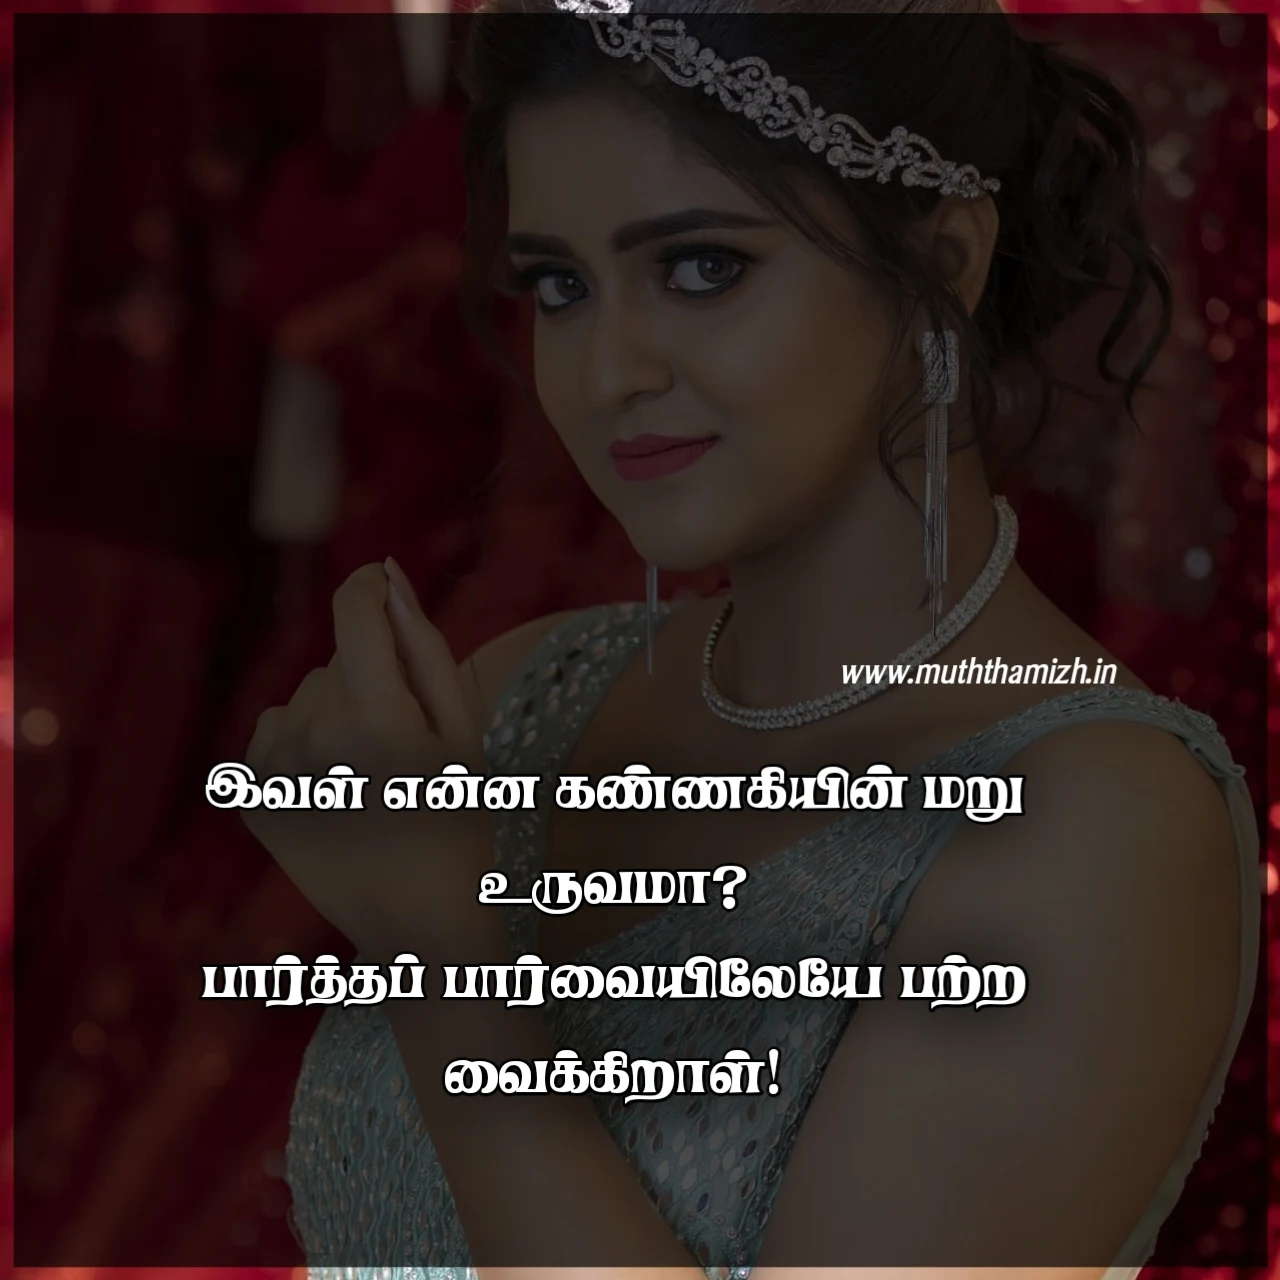 paarvai quotes tamil text